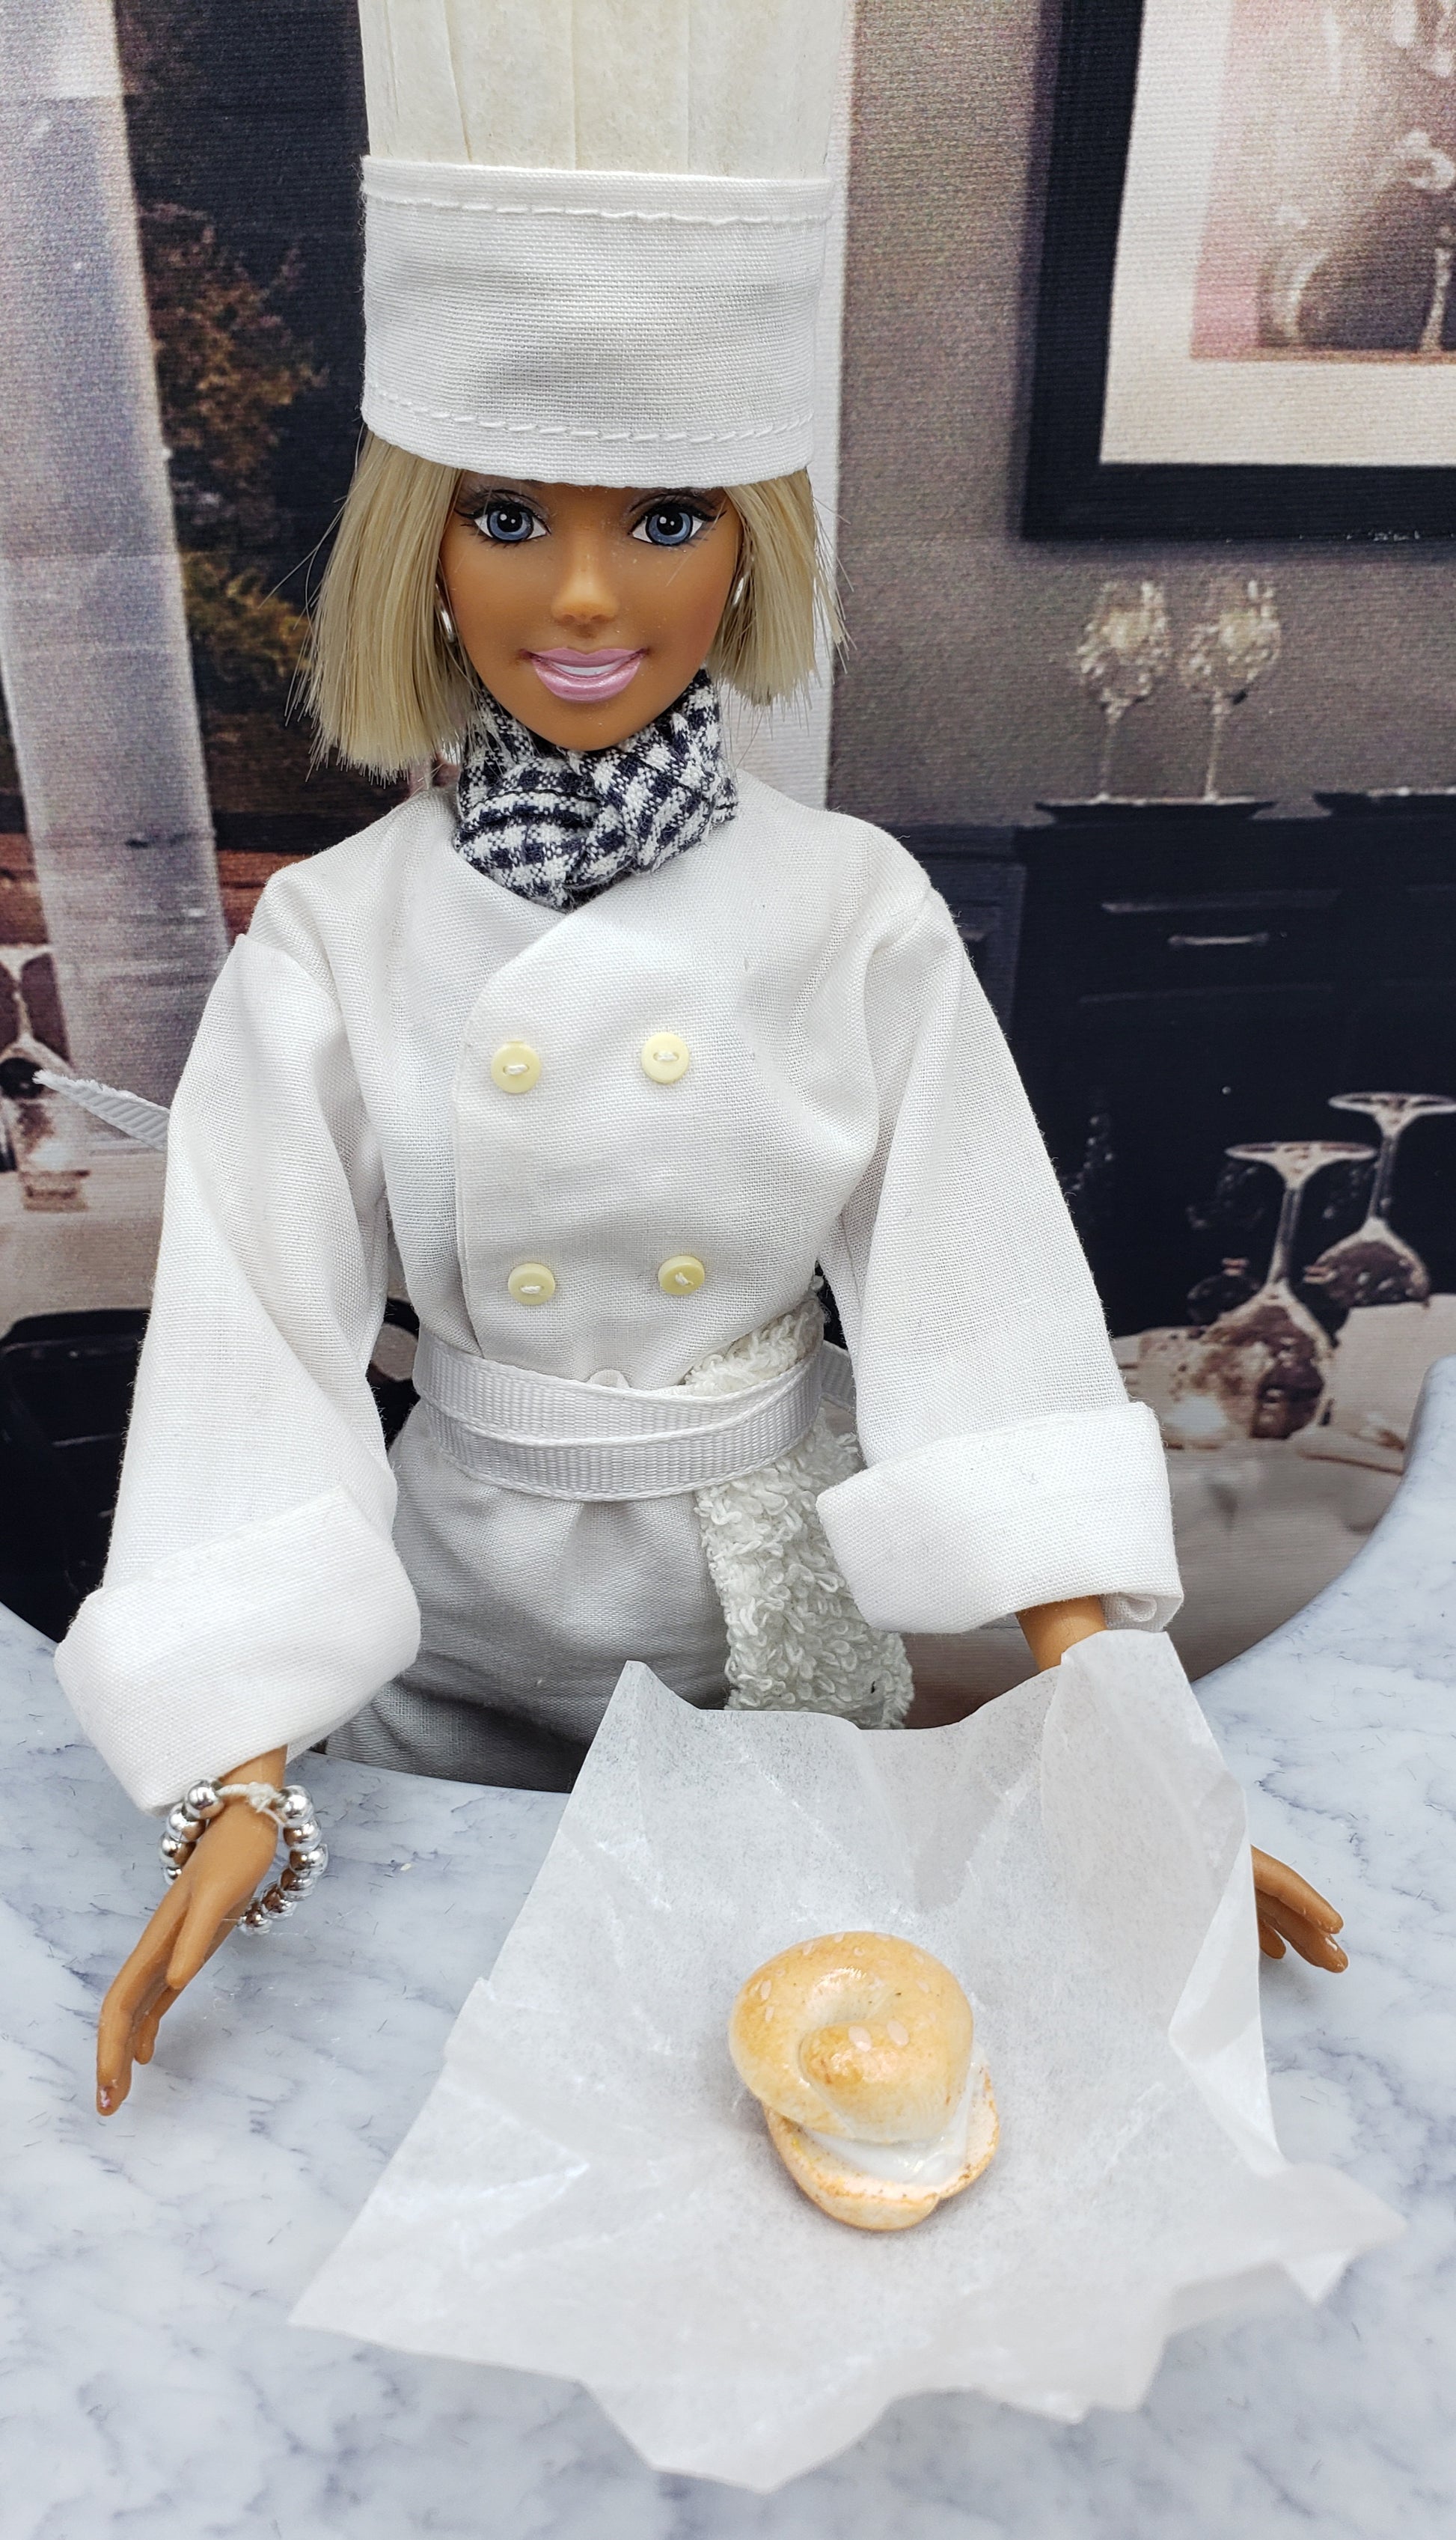 Barbie with Plain Bagel and Cream Cheese